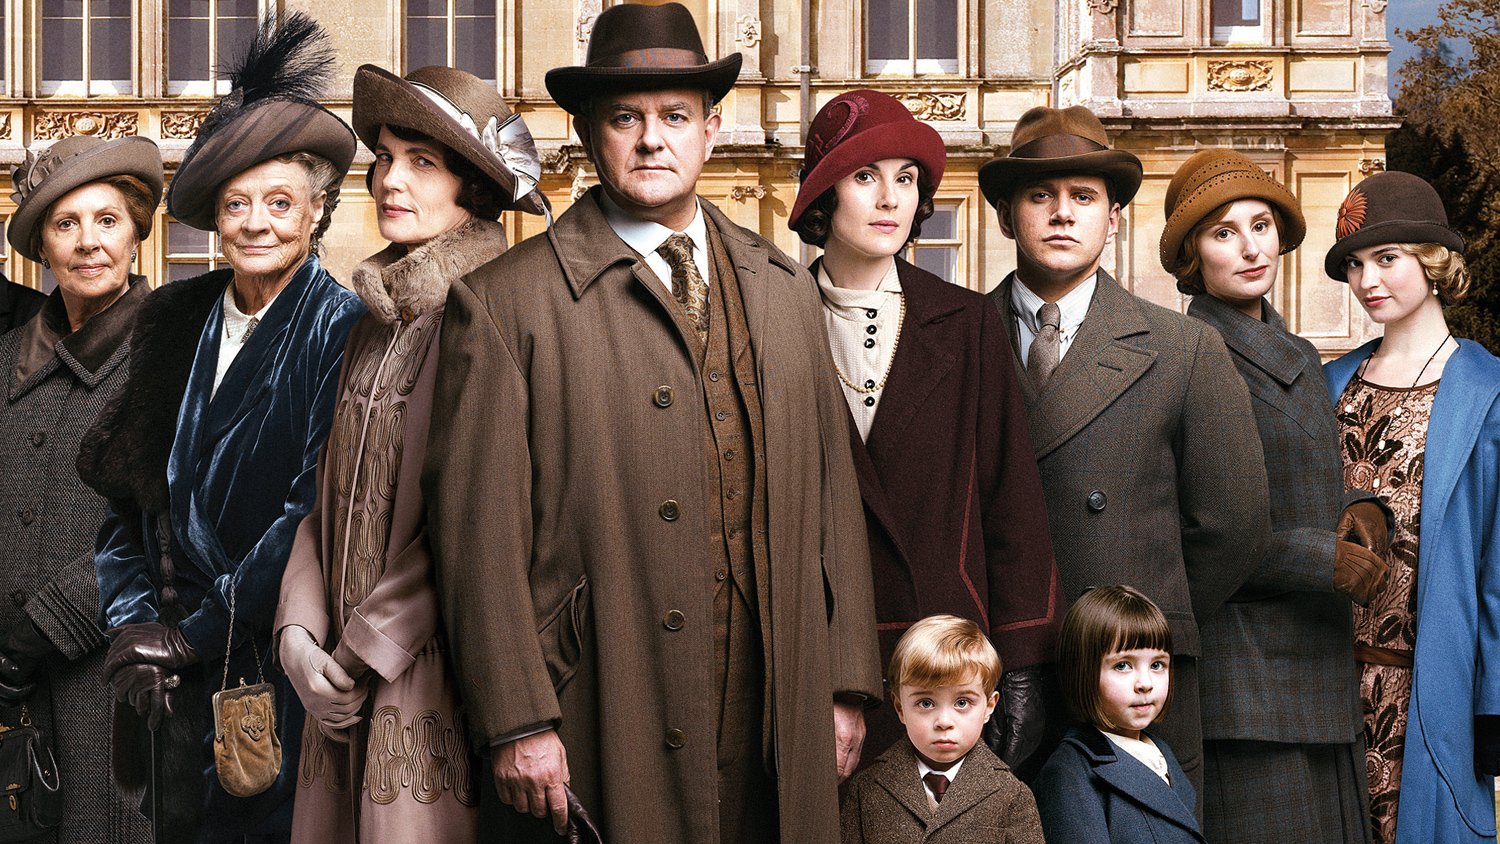  Downton, downton abbey, British aristocracy, Historical drama, Crawley family, servants, early twentieth century, tv show, just finished watching, tv programme, television, streaming, television show, television series, tv , watching, catch up, end 